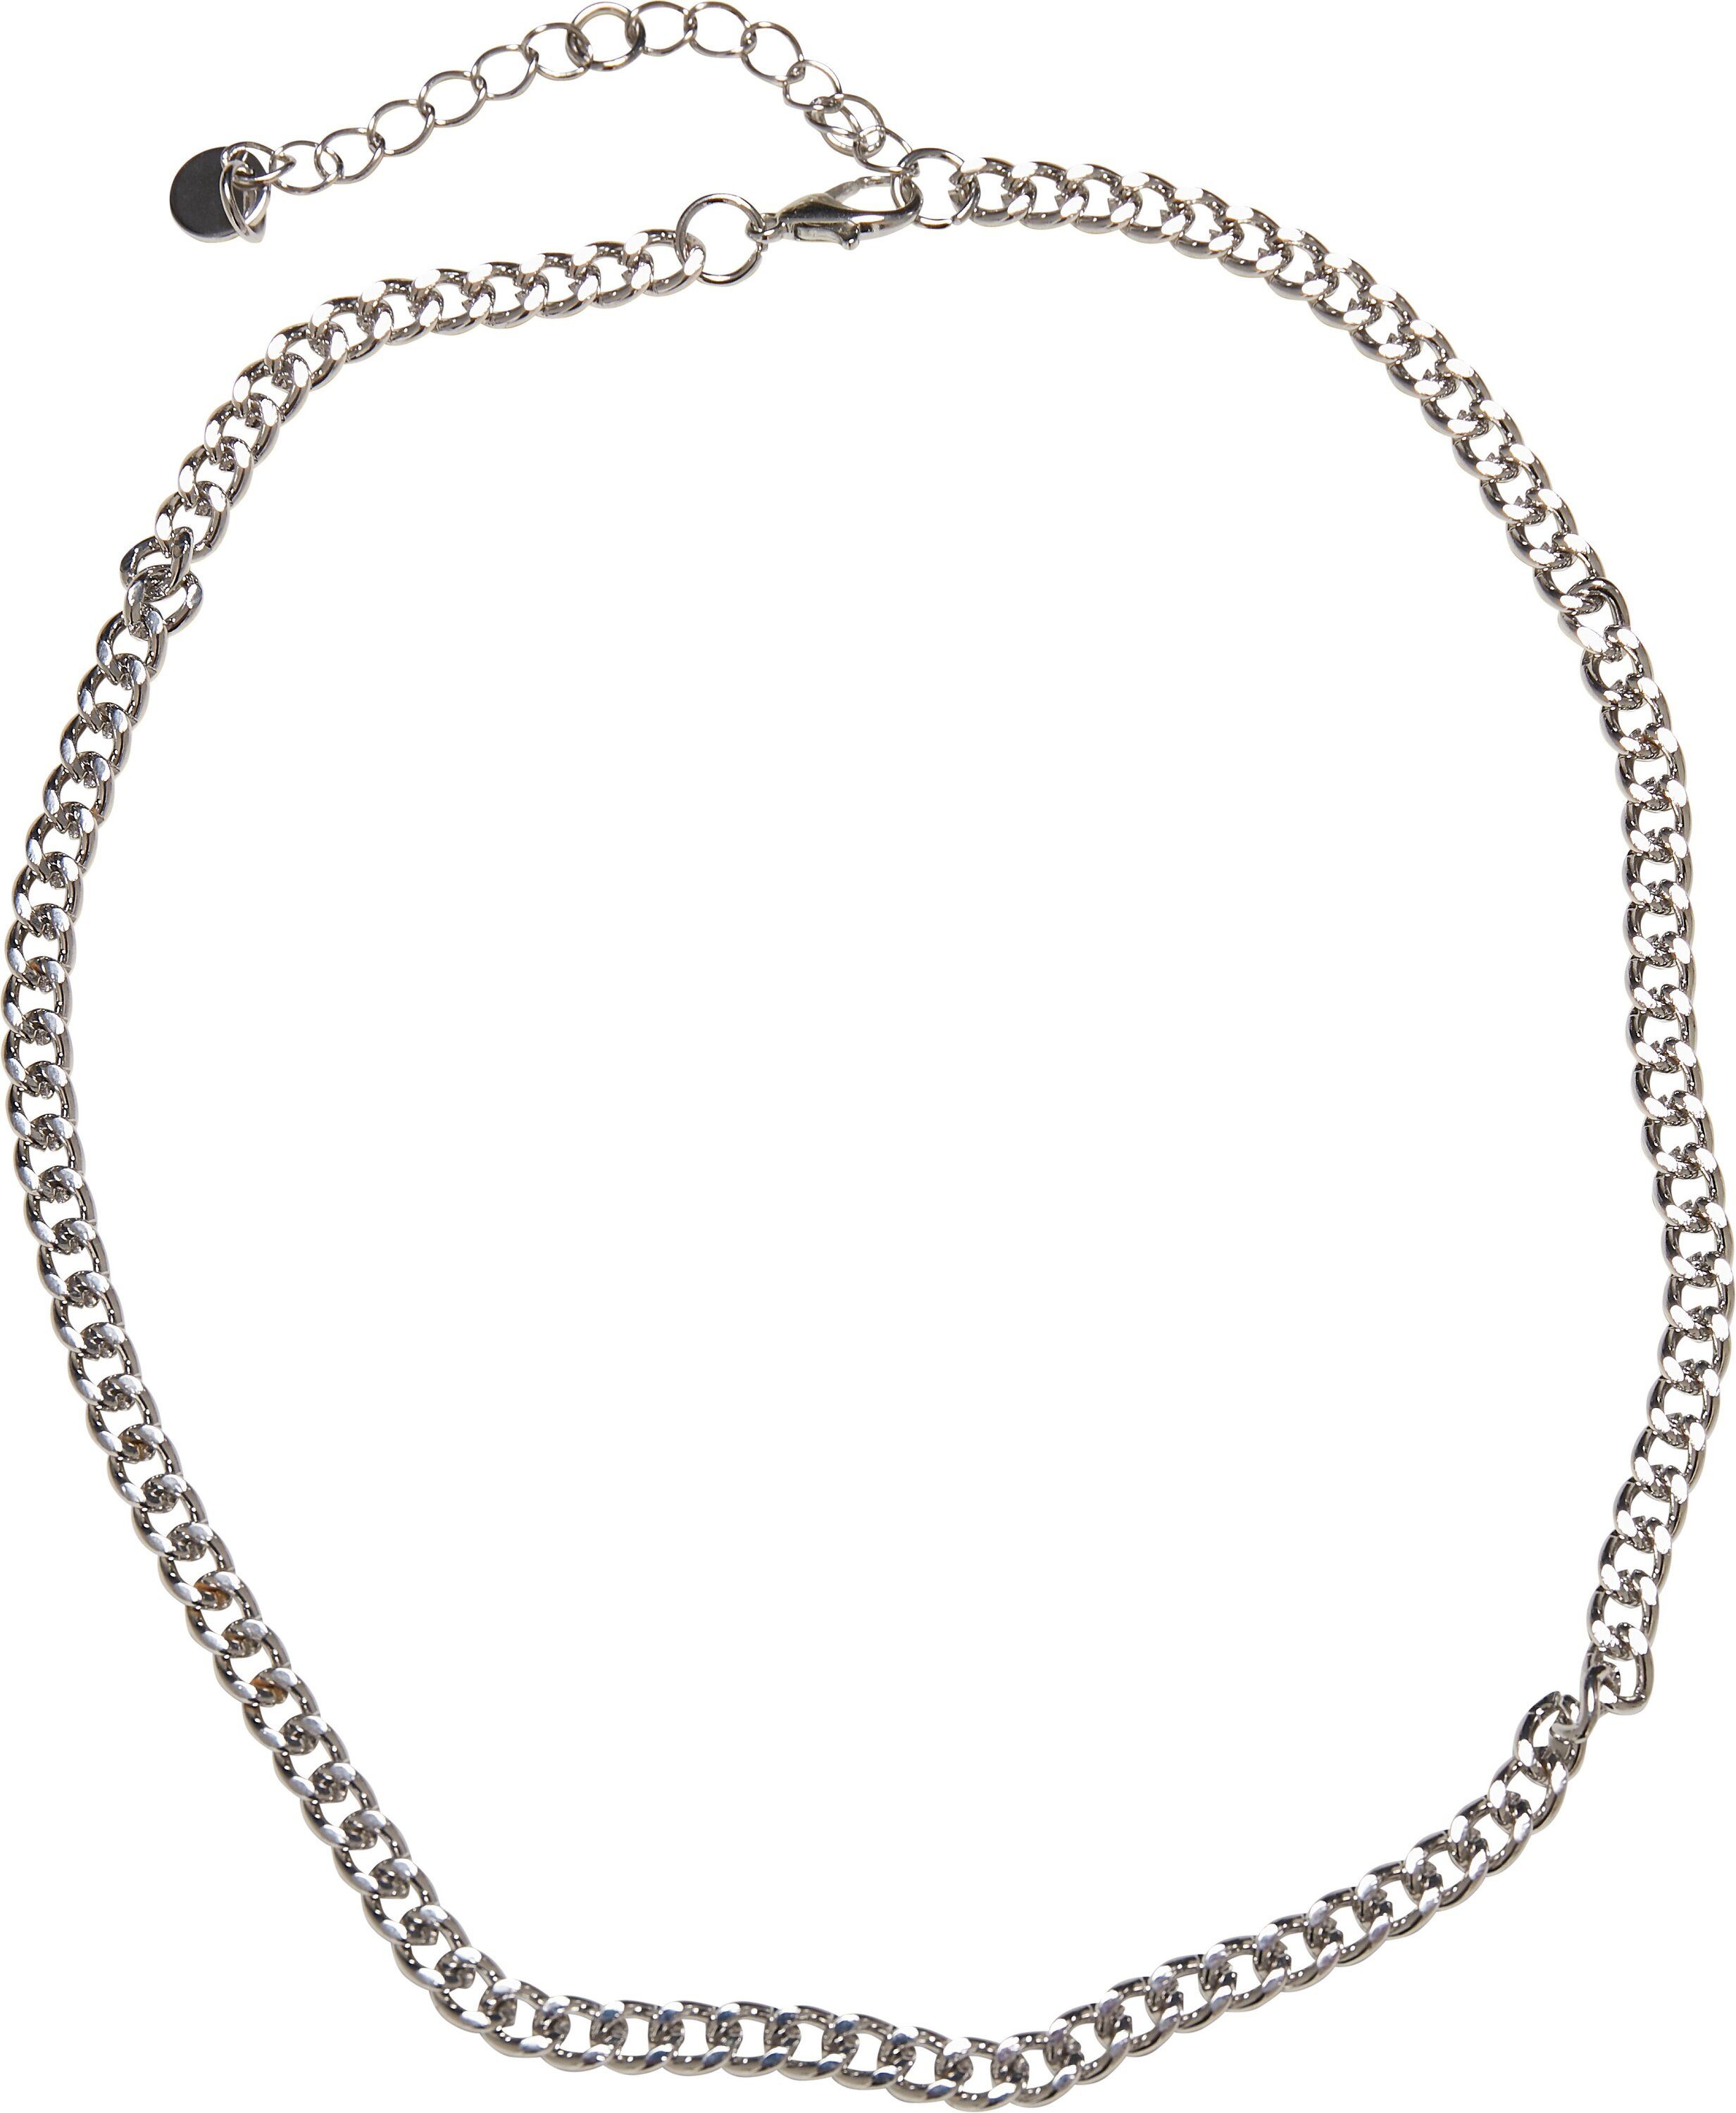 Basic Necklace Edelstahlkette silver Saturn URBAN Accessoires Small CLASSICS